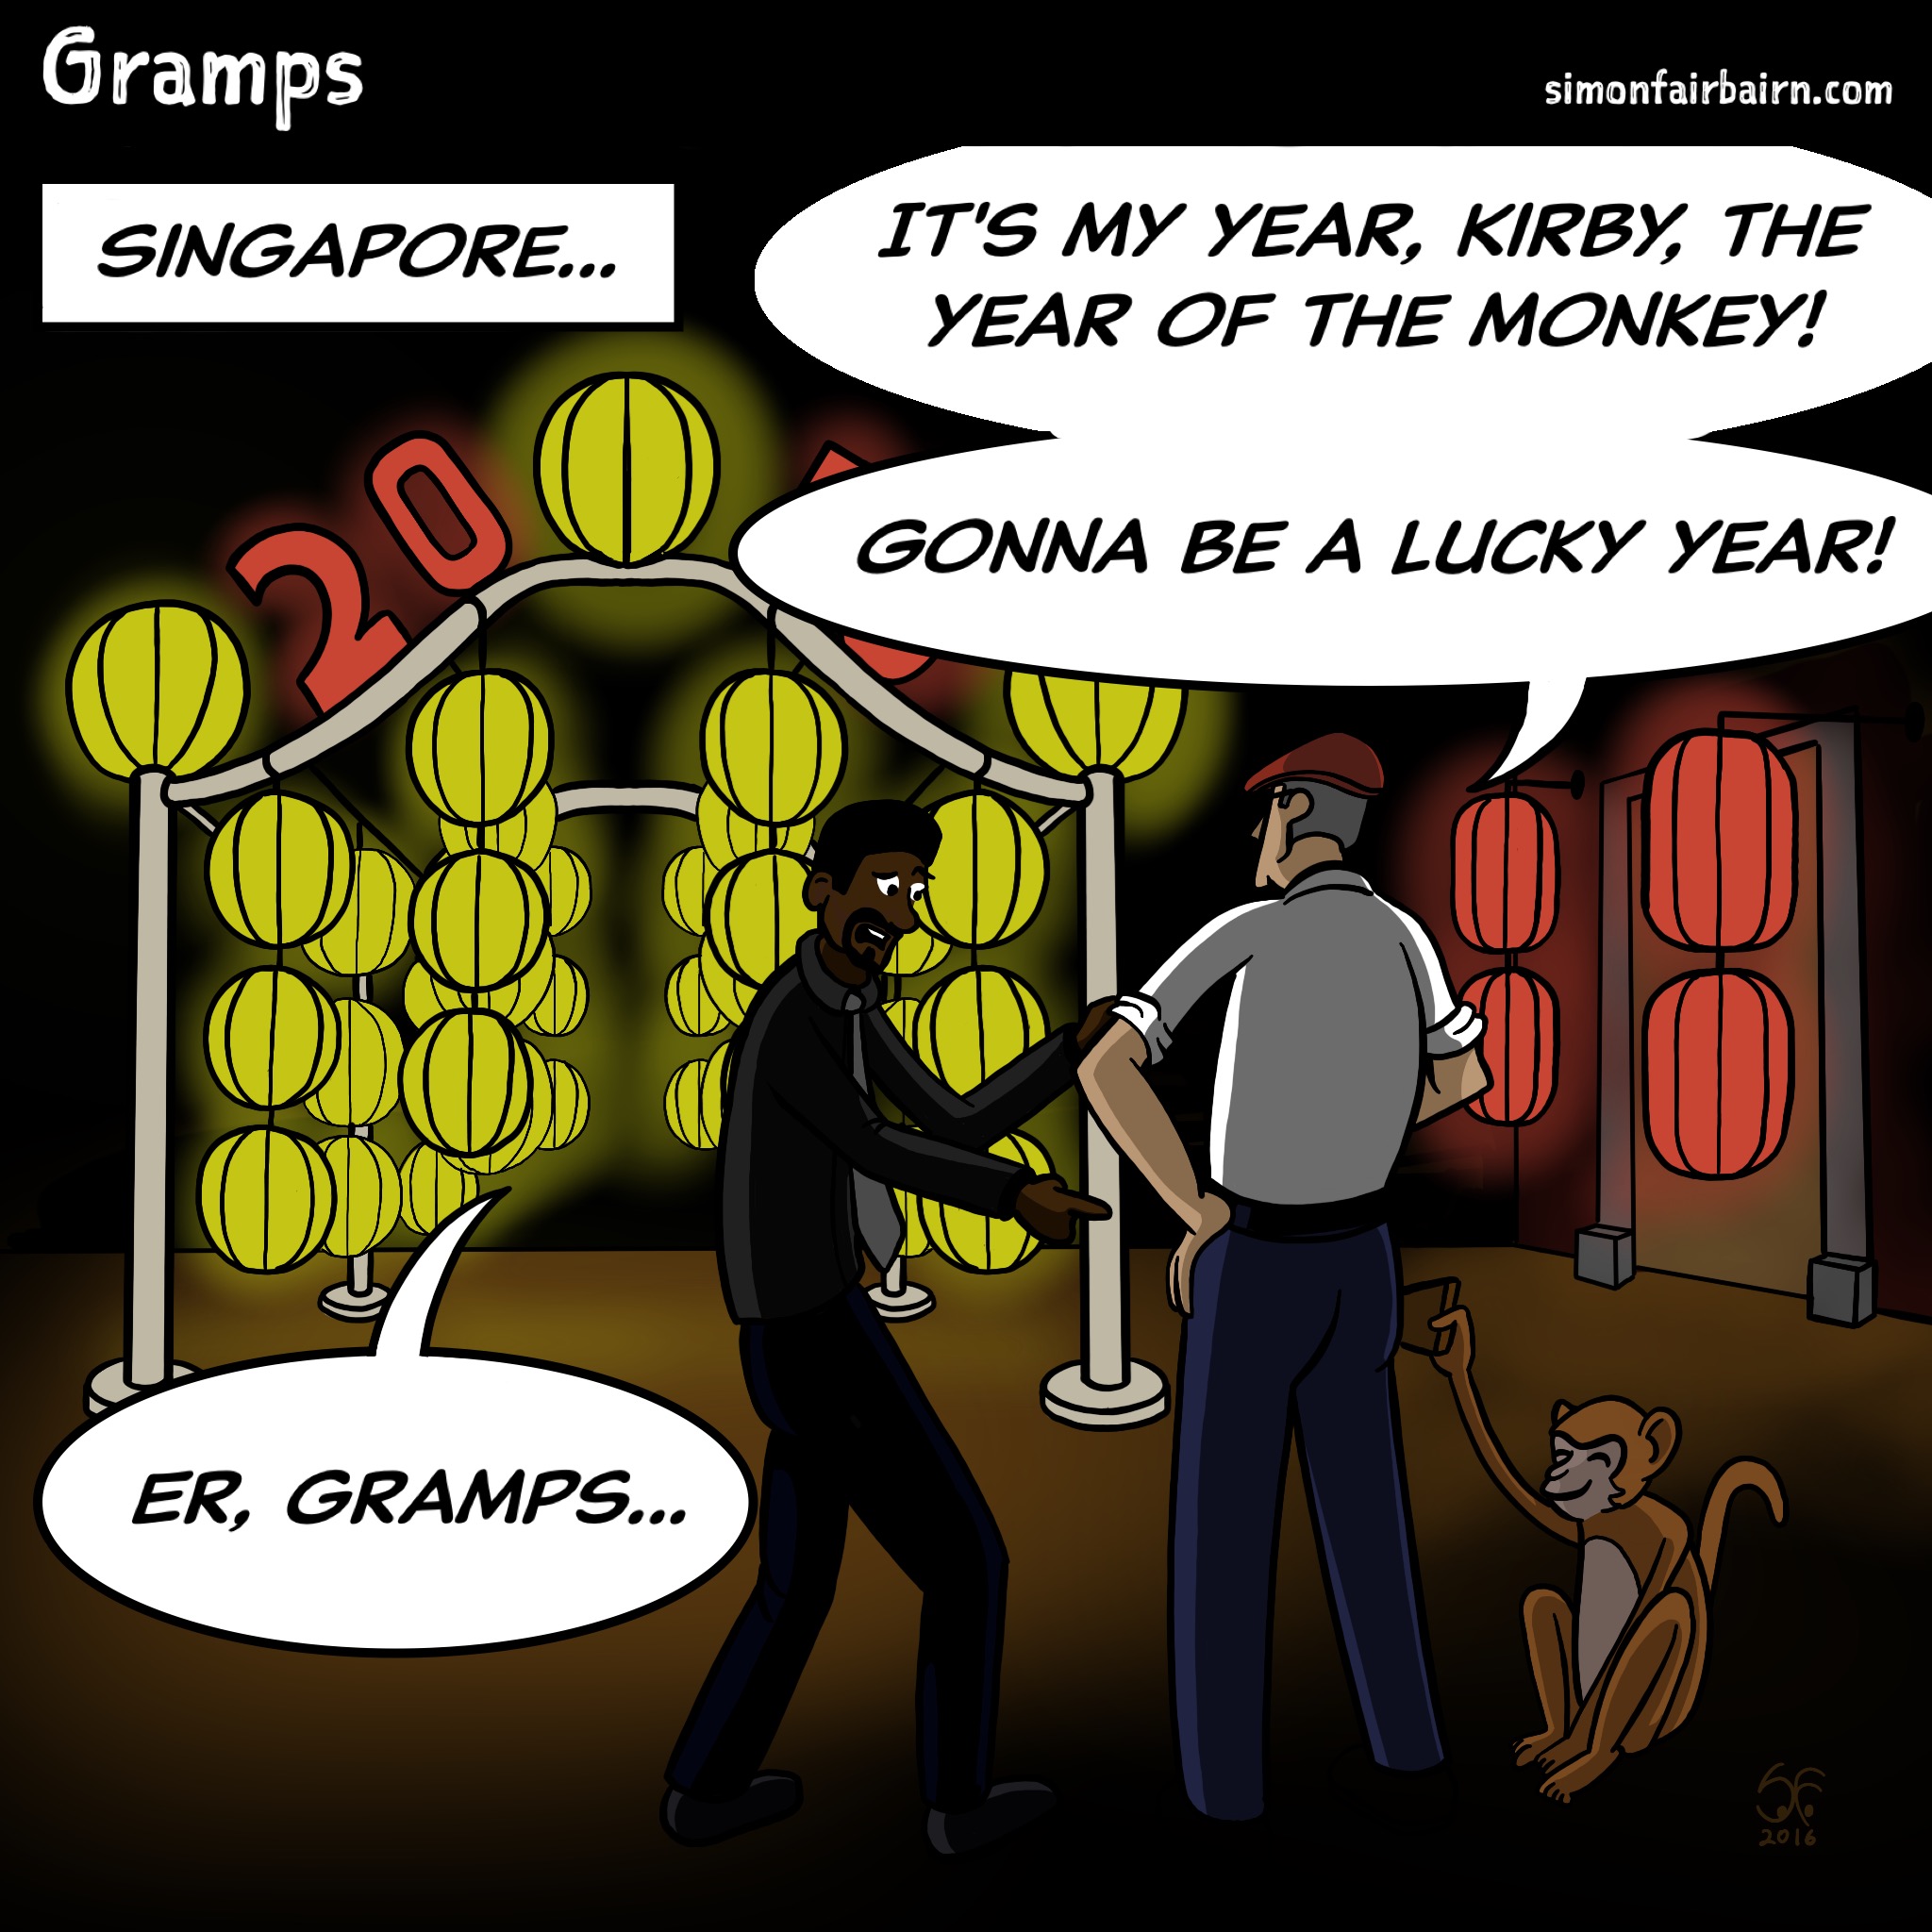 Gramps is looking at a new year display in Singapore while Kirby tries to alert him to a monkey stealing his wallet.